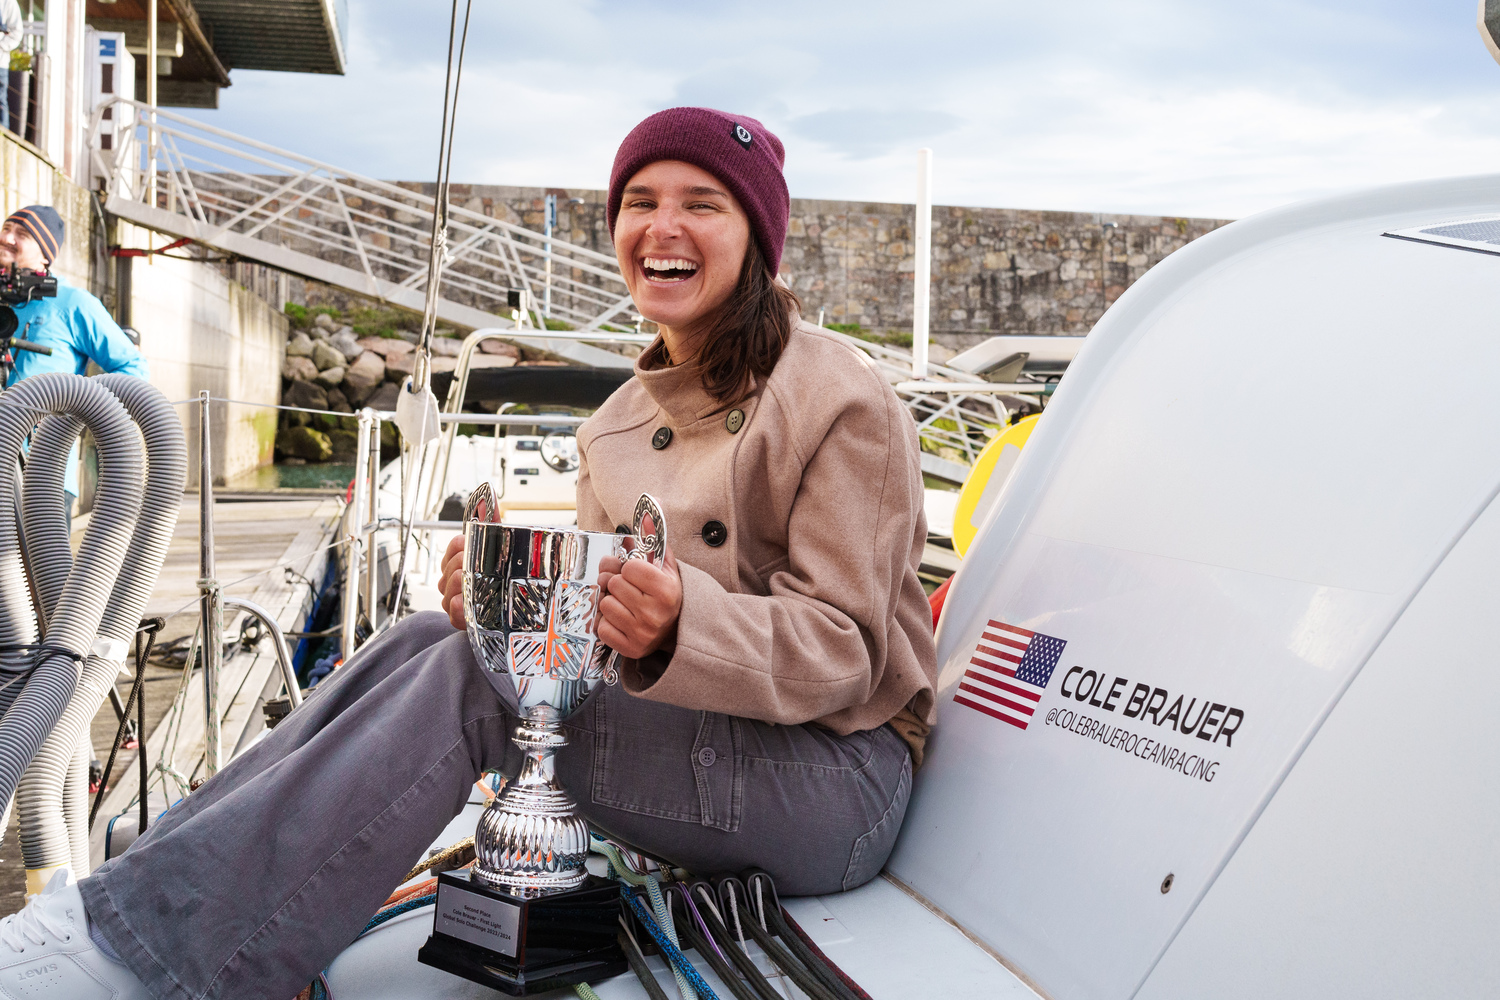 Cole Brauer with her silver trophy for finishing second in the Global Solo Challenge. ALVARO SANCHIS